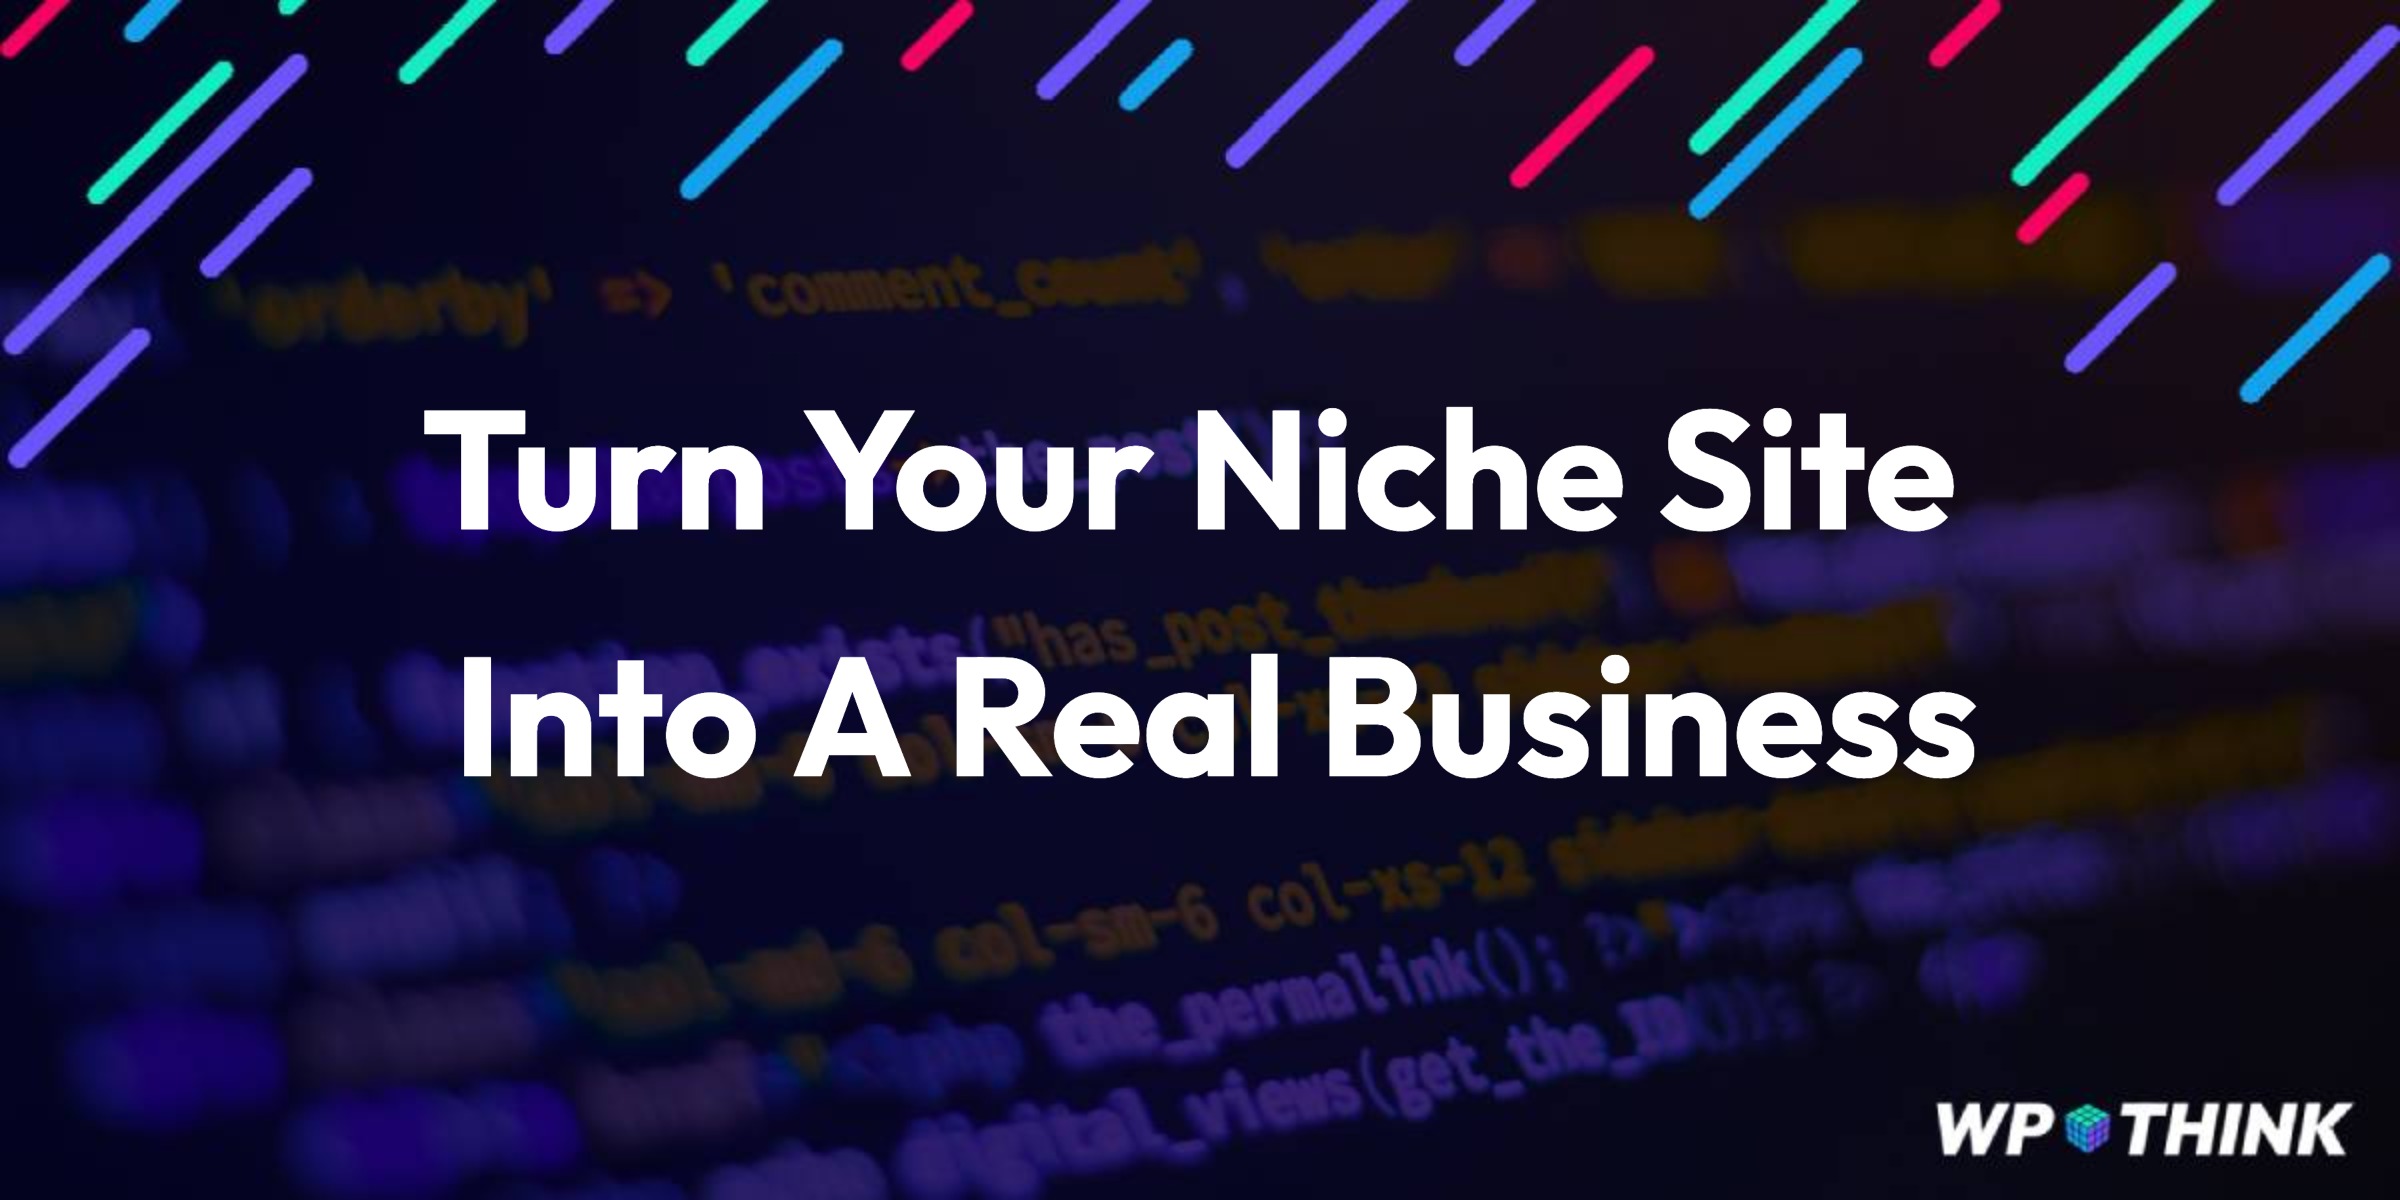 11 Ways To Completely Evolve Your Niche Site Into A Real Business rocket.net hosting review